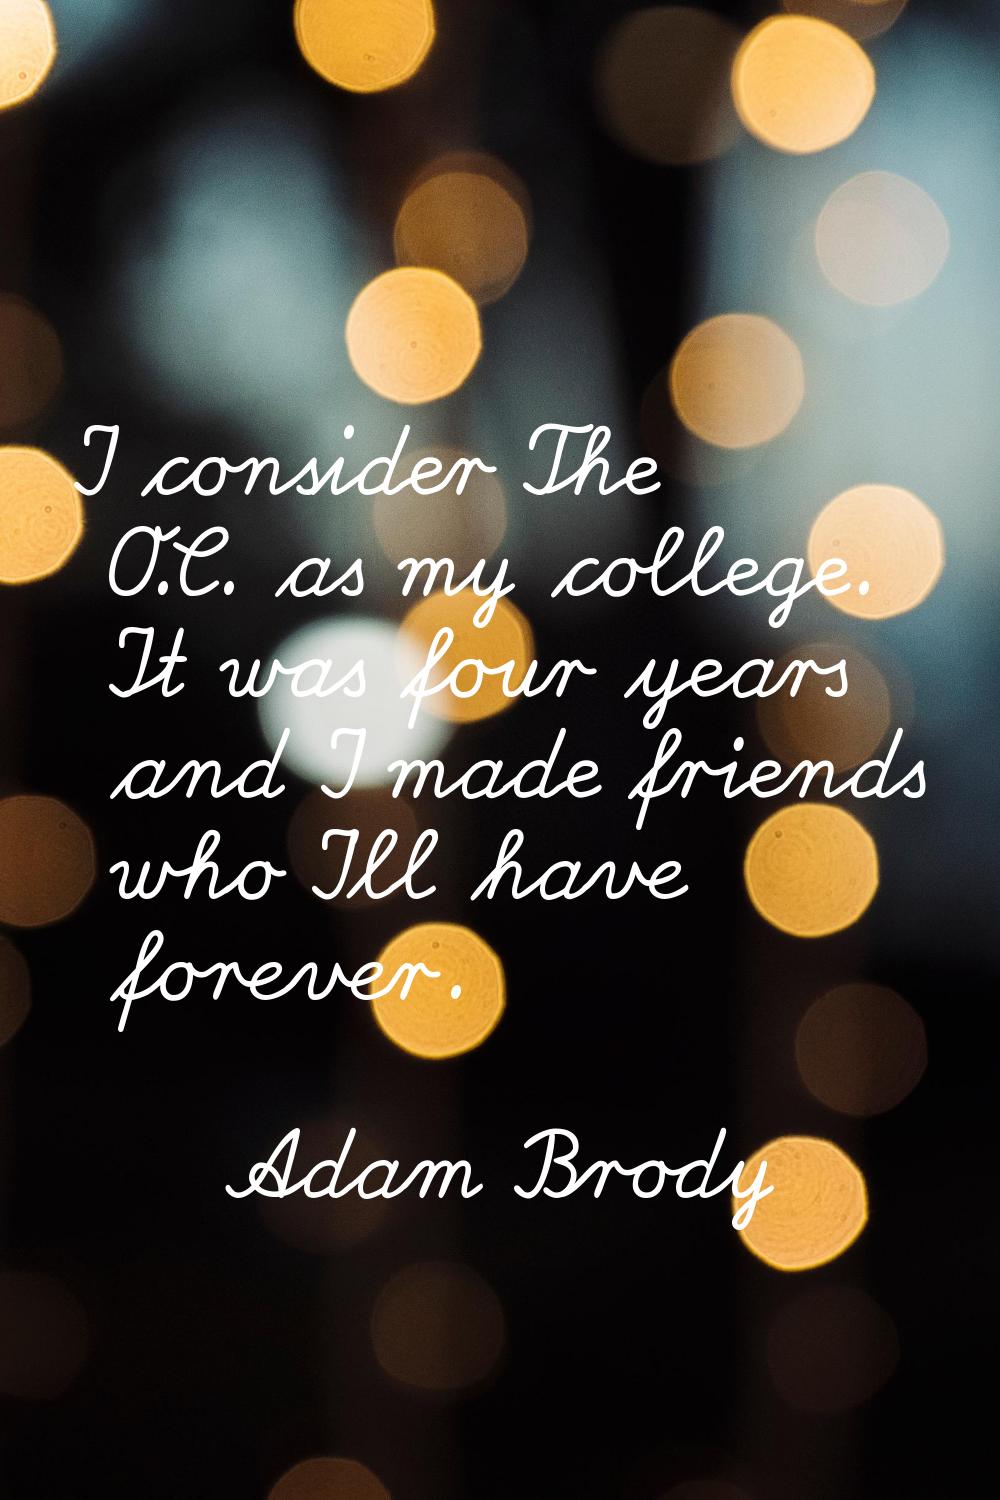 I consider The O.C. as my college. It was four years and I made friends who I'll have forever.